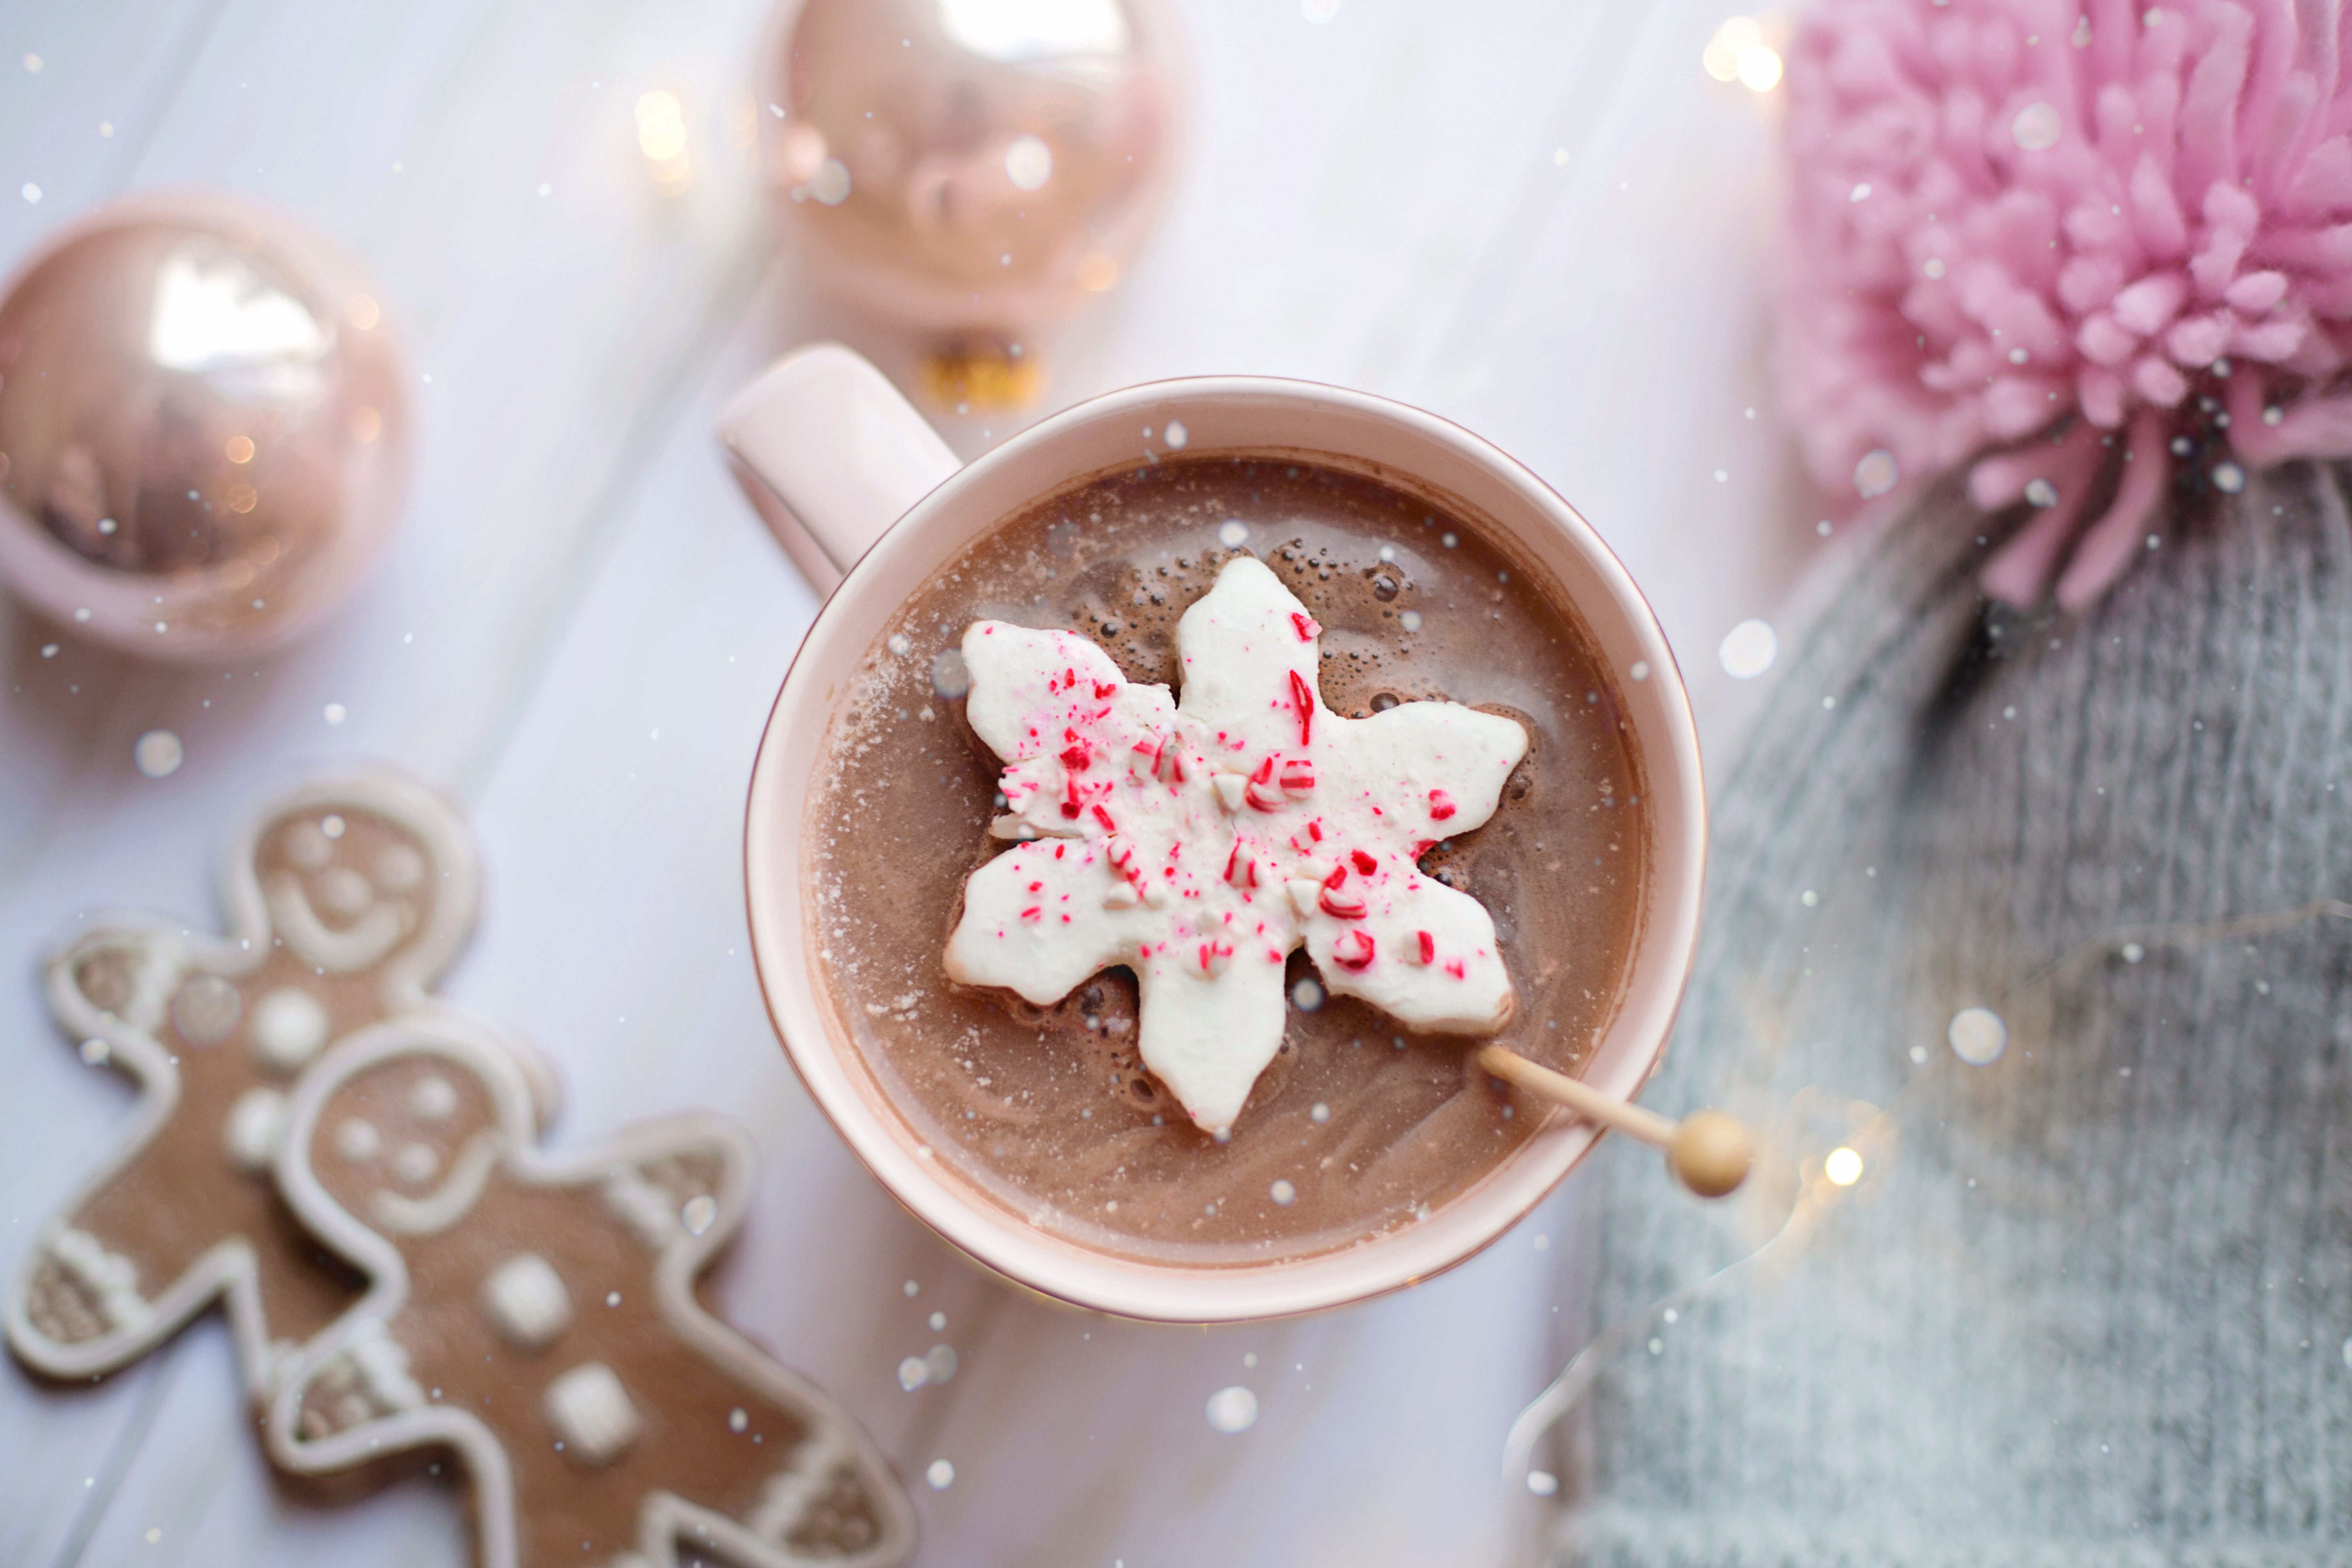 A hot coco drink with a peppermint cookie on top